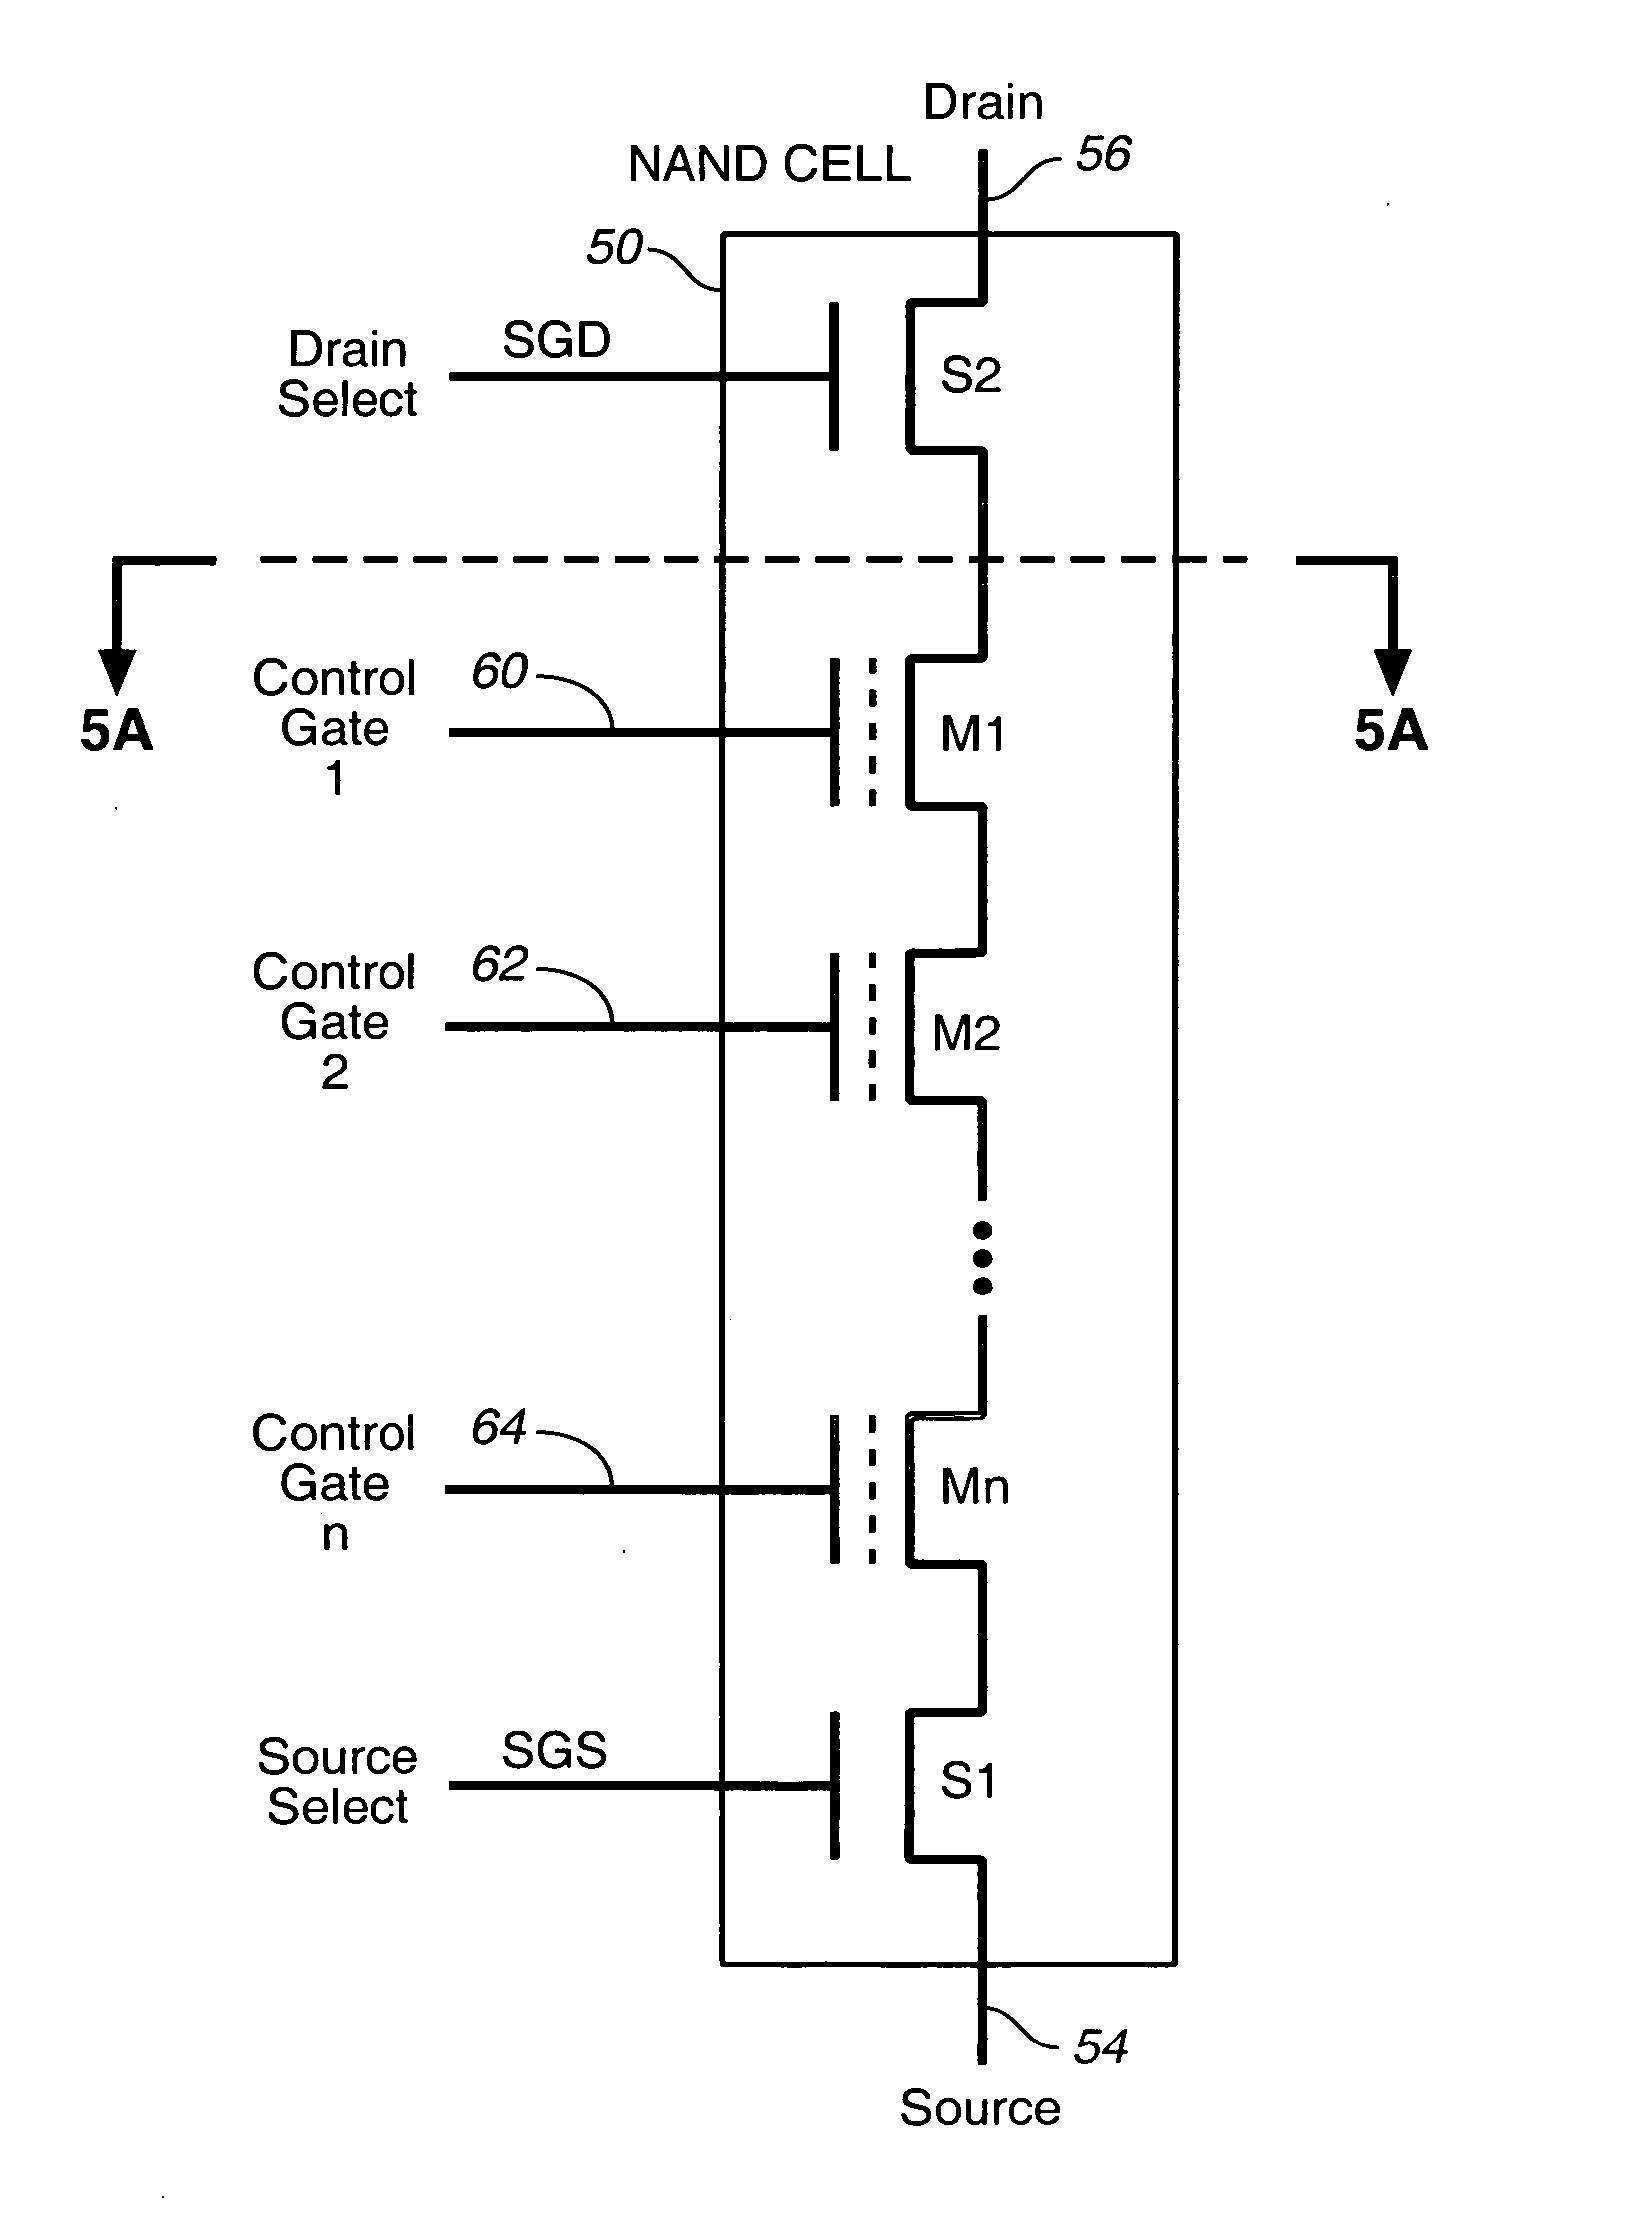 Partition of non-volatile memory array to reduce bit line capacitance